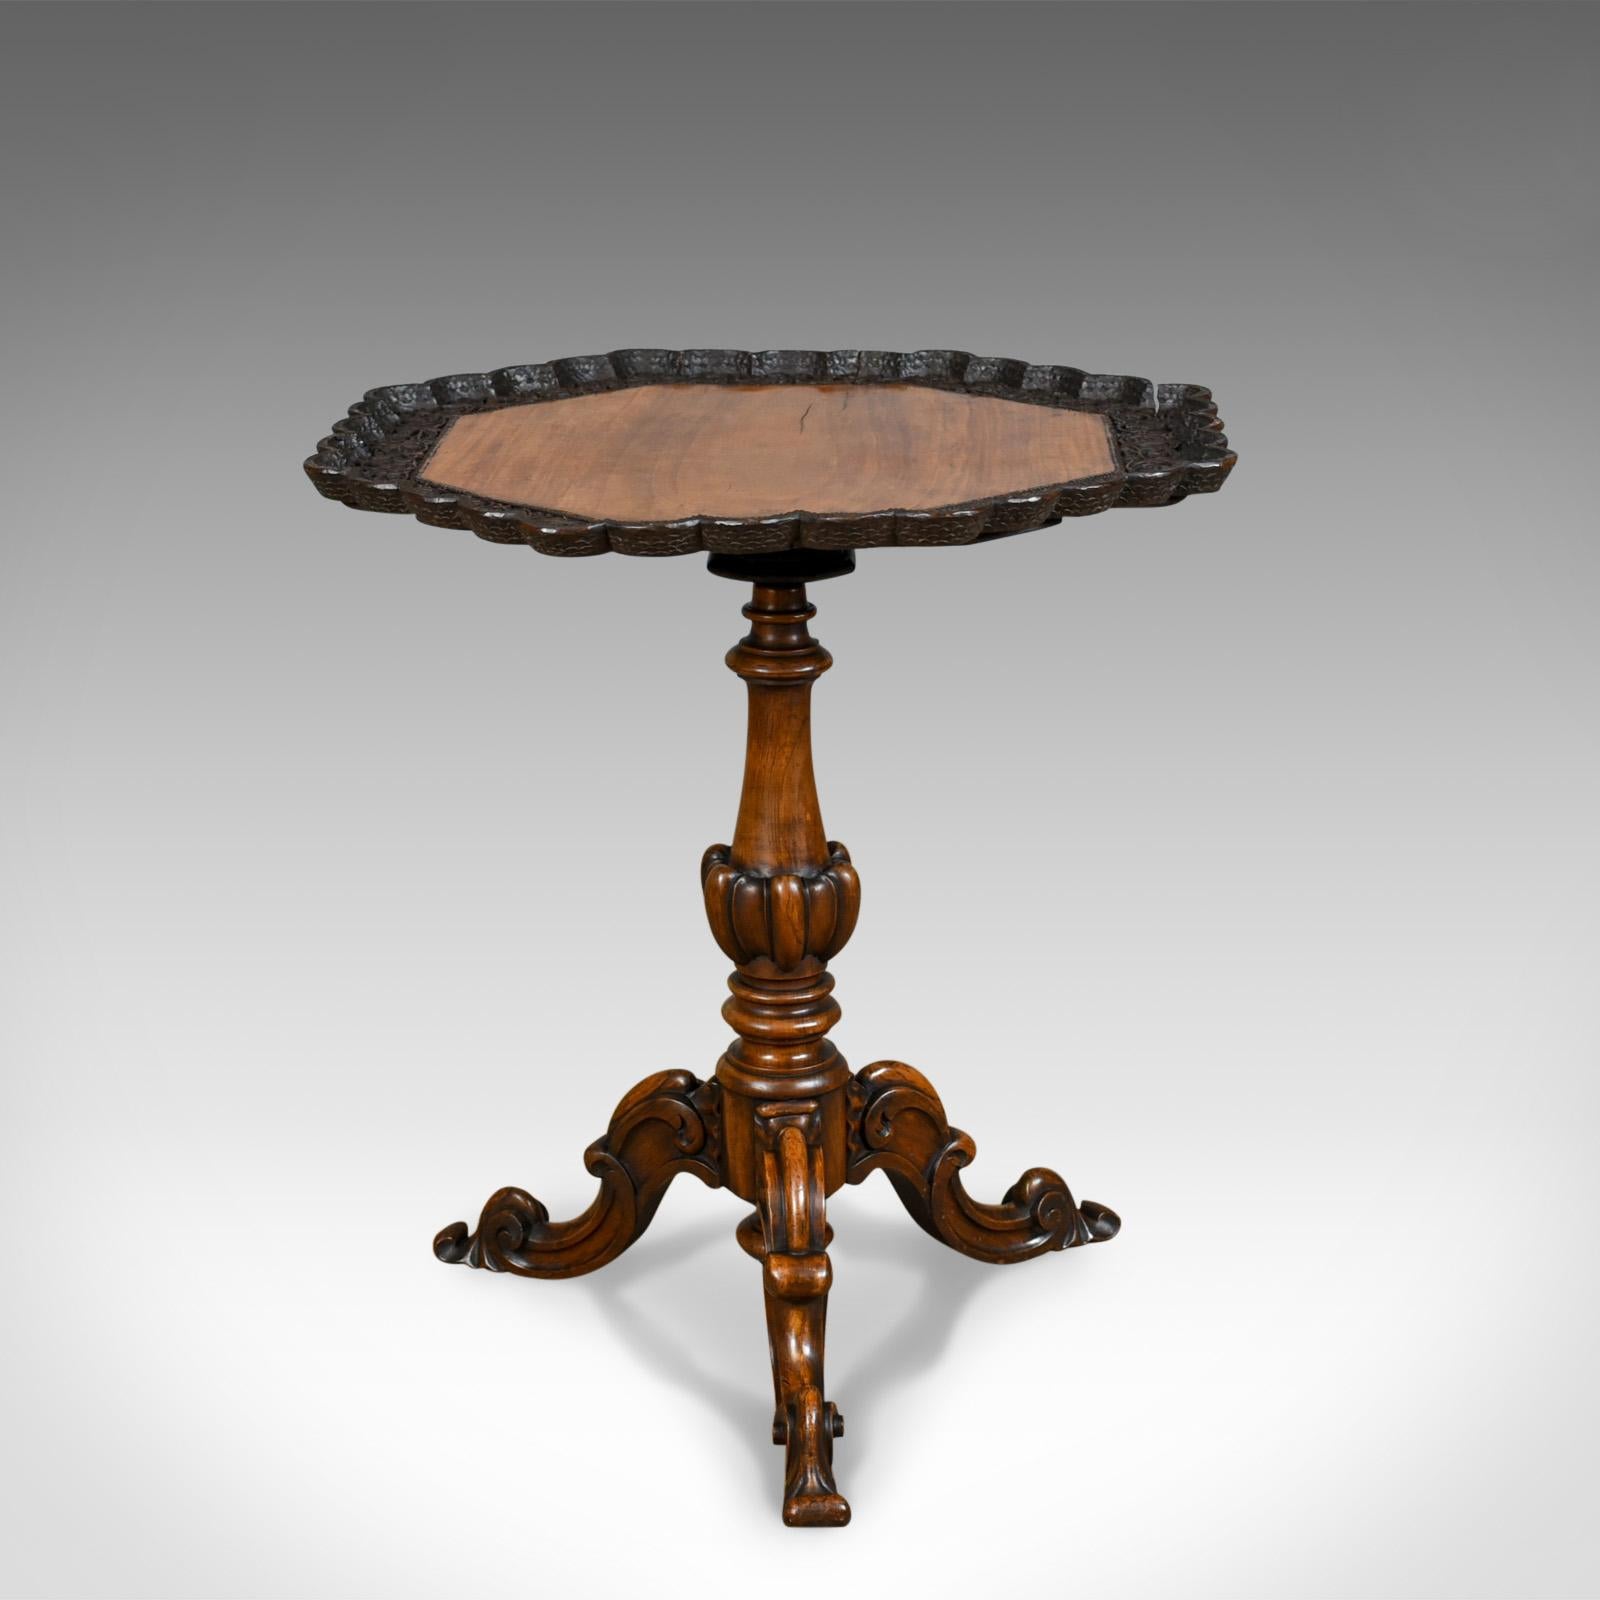 This is an antique wine table, an English, Victorian, octagonal, side table in rosewood dating to circa 1870.

Crafted in select stocks of quality rosewood
Good colour and grain interest in a lustrous wax polished finish
Of quality craftsmanship